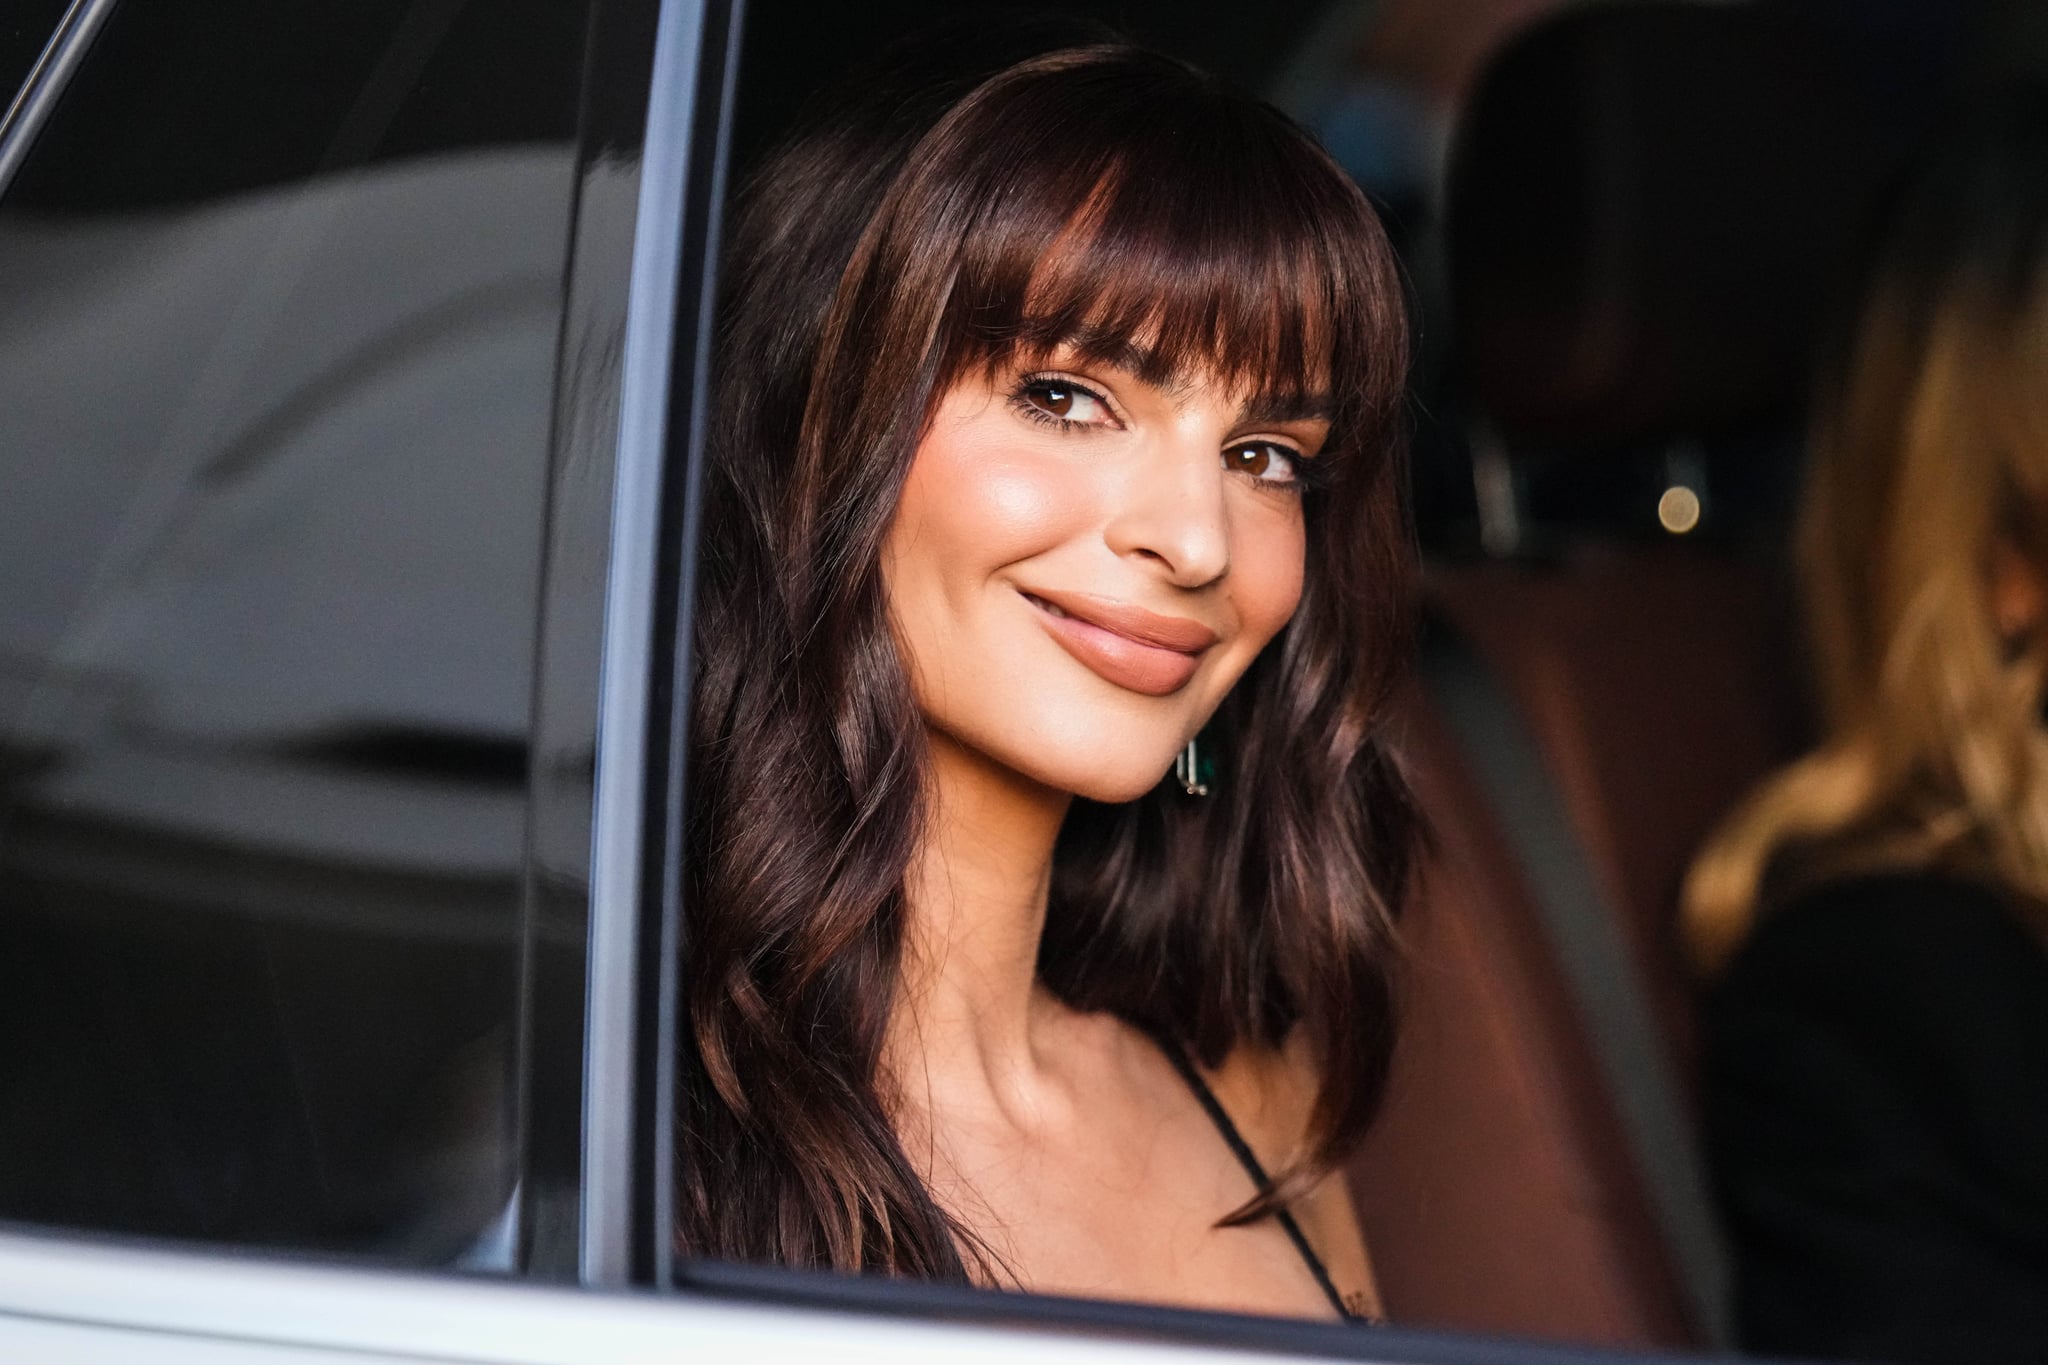 CANNES, FRANCE - MAY 23: Emily Ratajkowski is seen during the 75th annual Cannes film festival on May 23, 2022 in Cannes, France. (Photo by Edward Berthelot/GC Images)